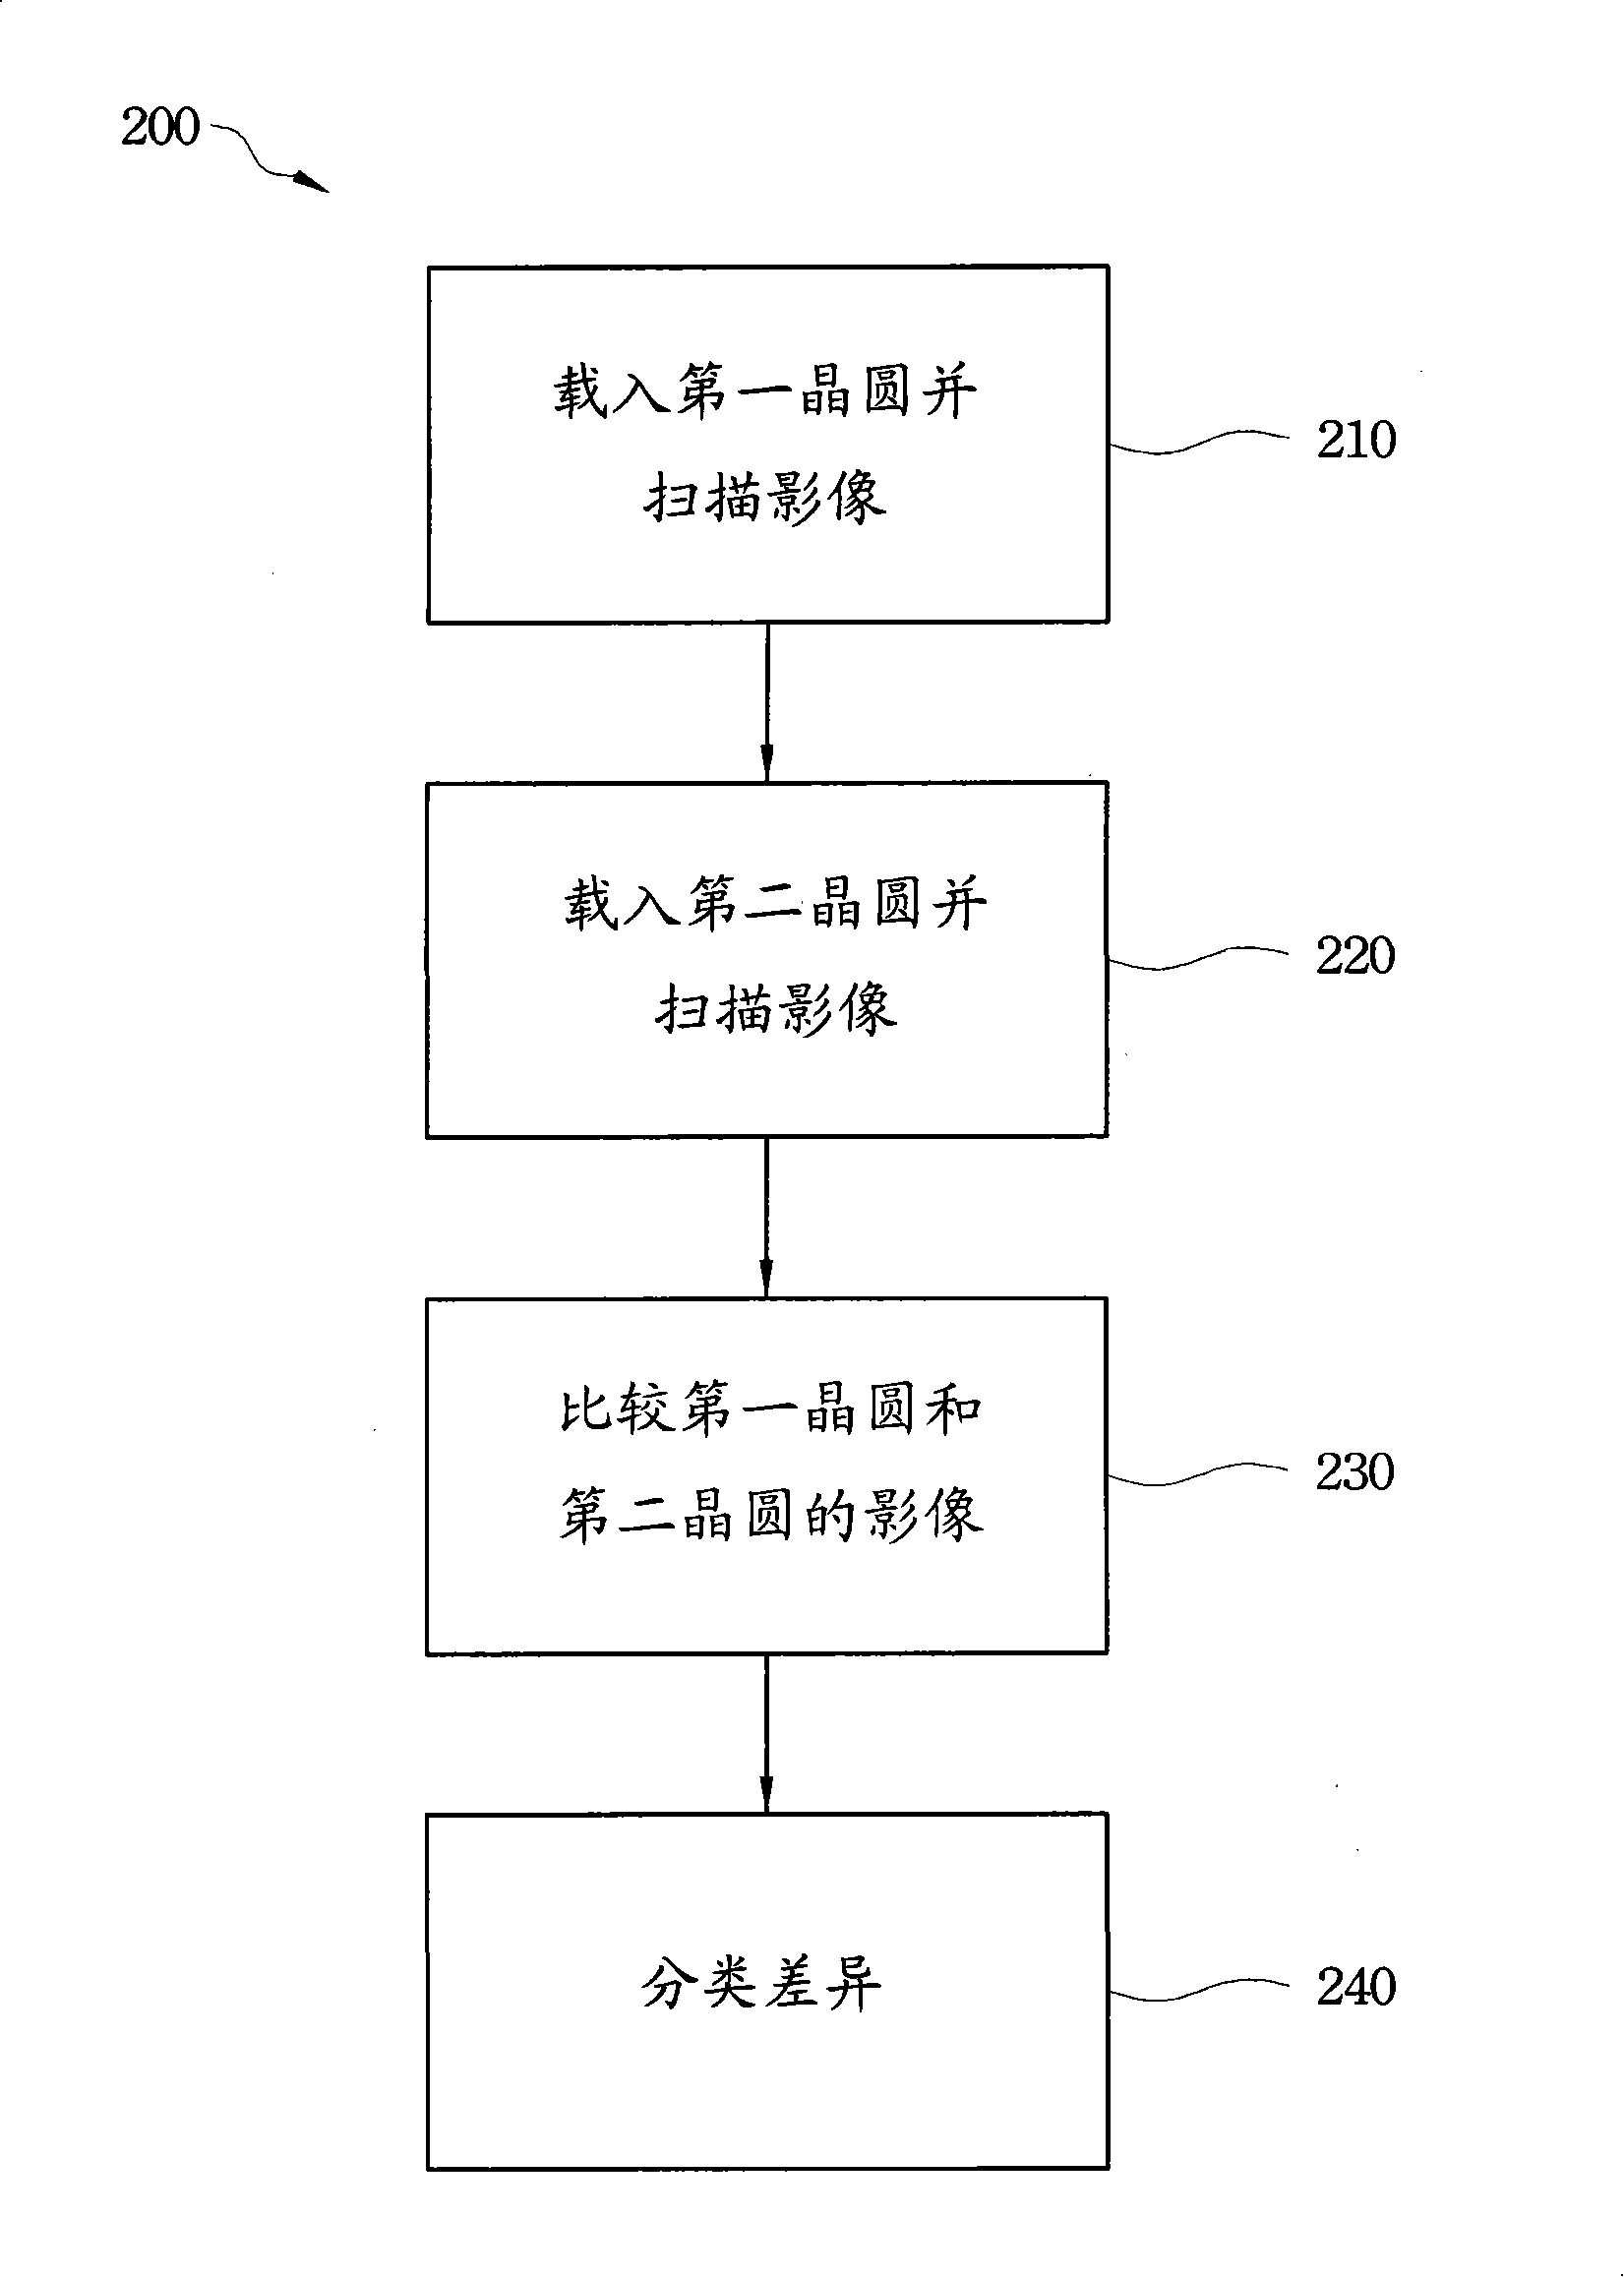 Method and system for wafer inspection